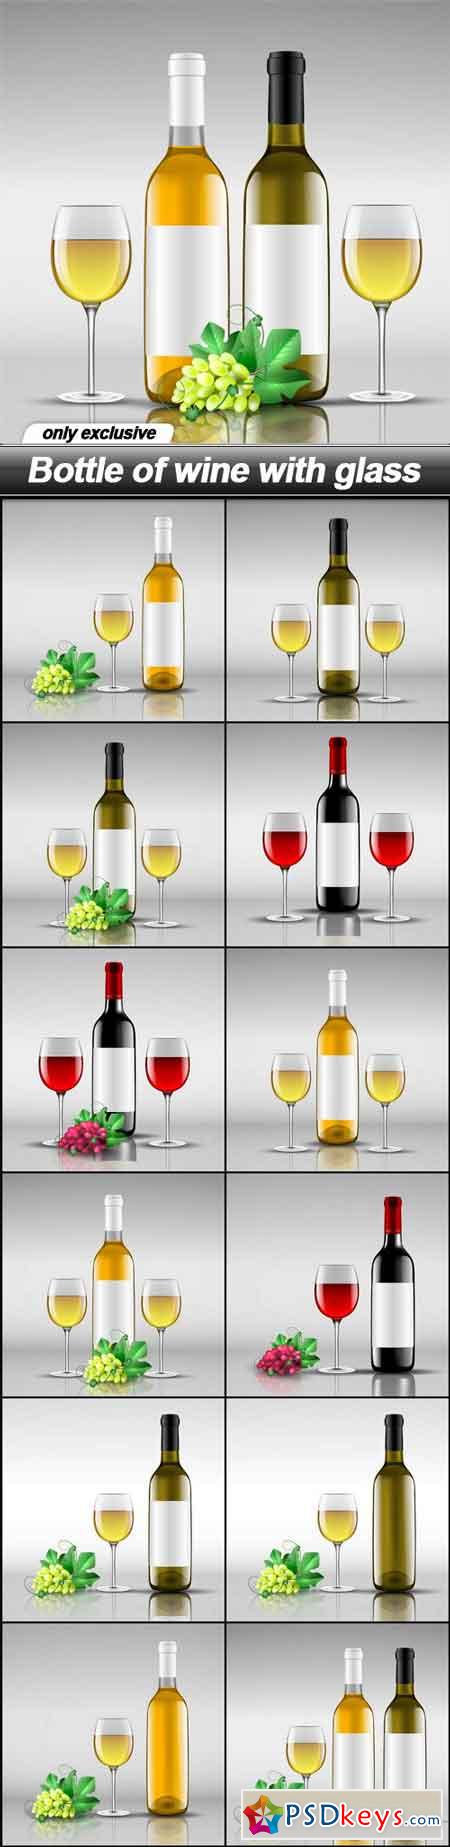 Bottle of wine with glass - 13 EPS